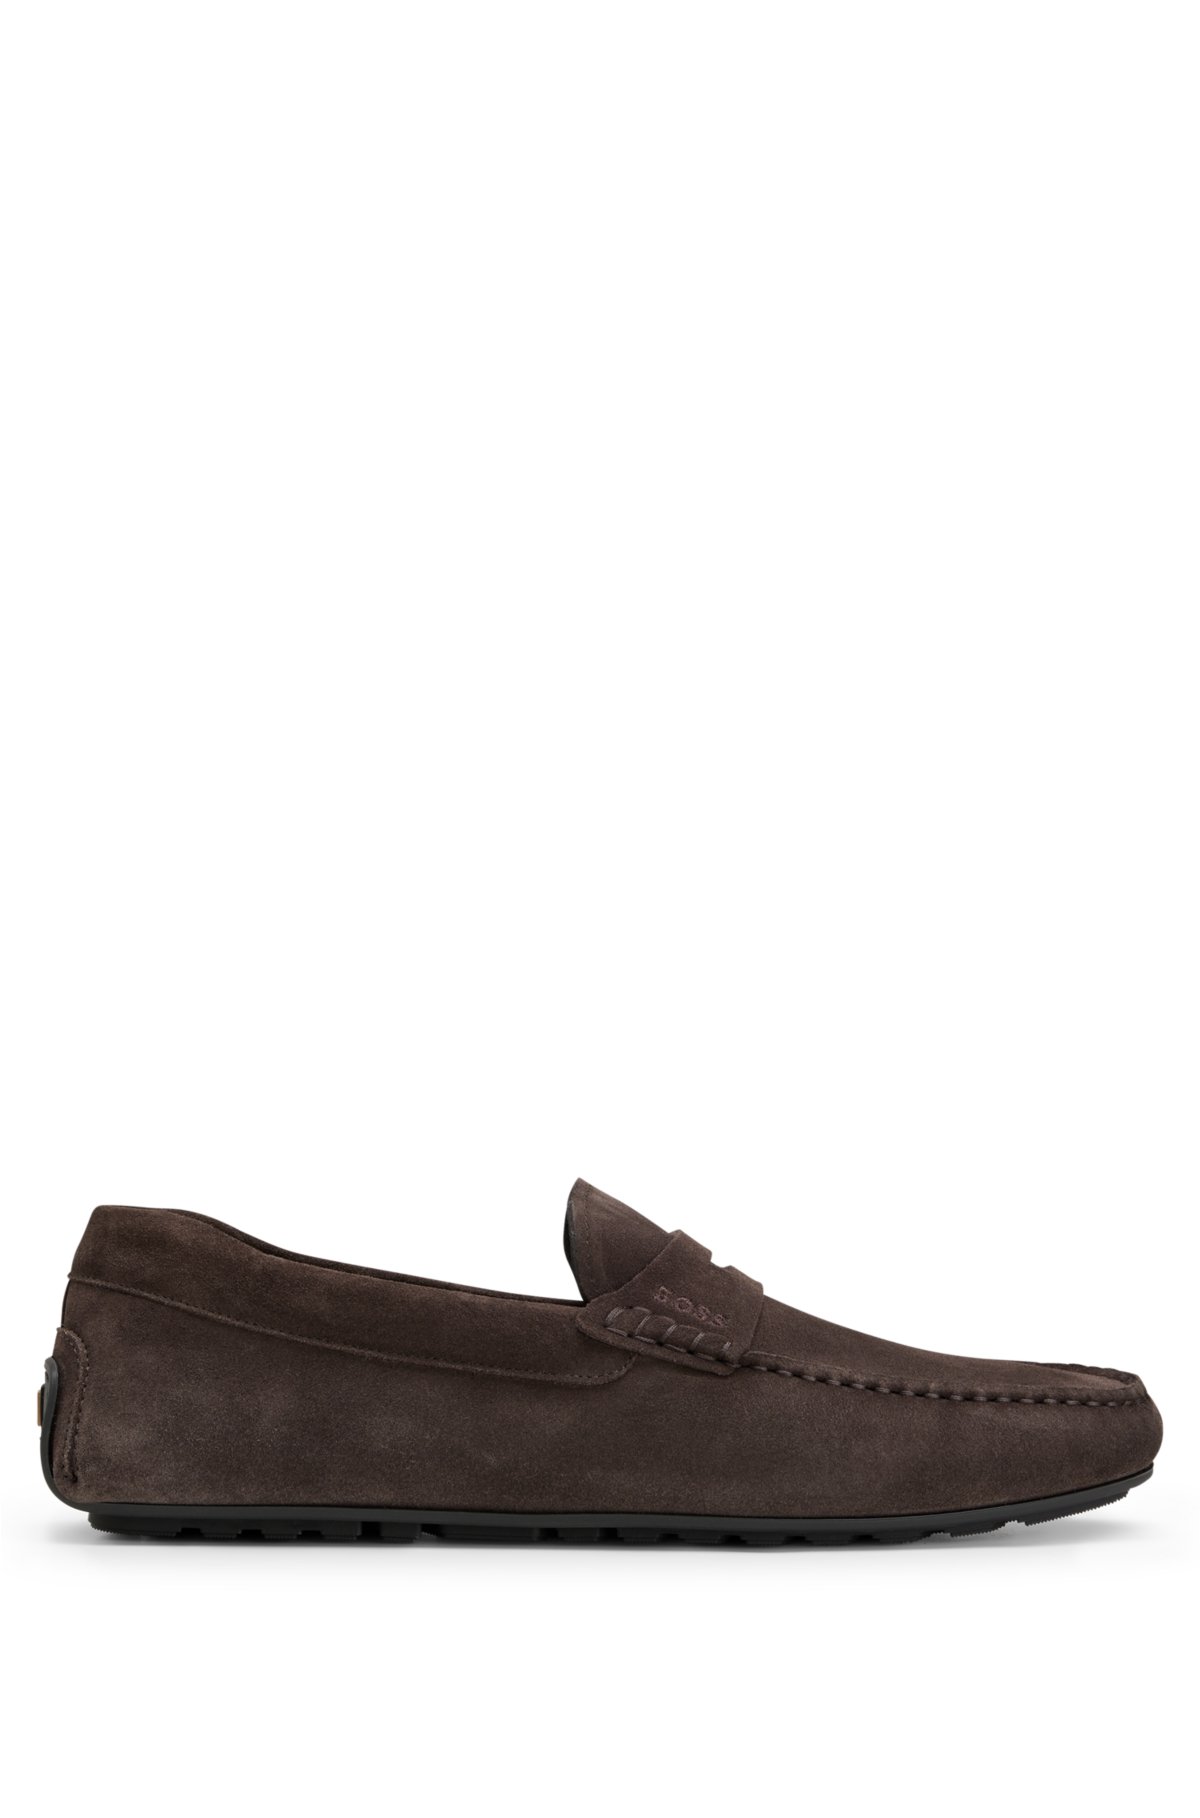 BOSS - Suede moccasins with branded trim